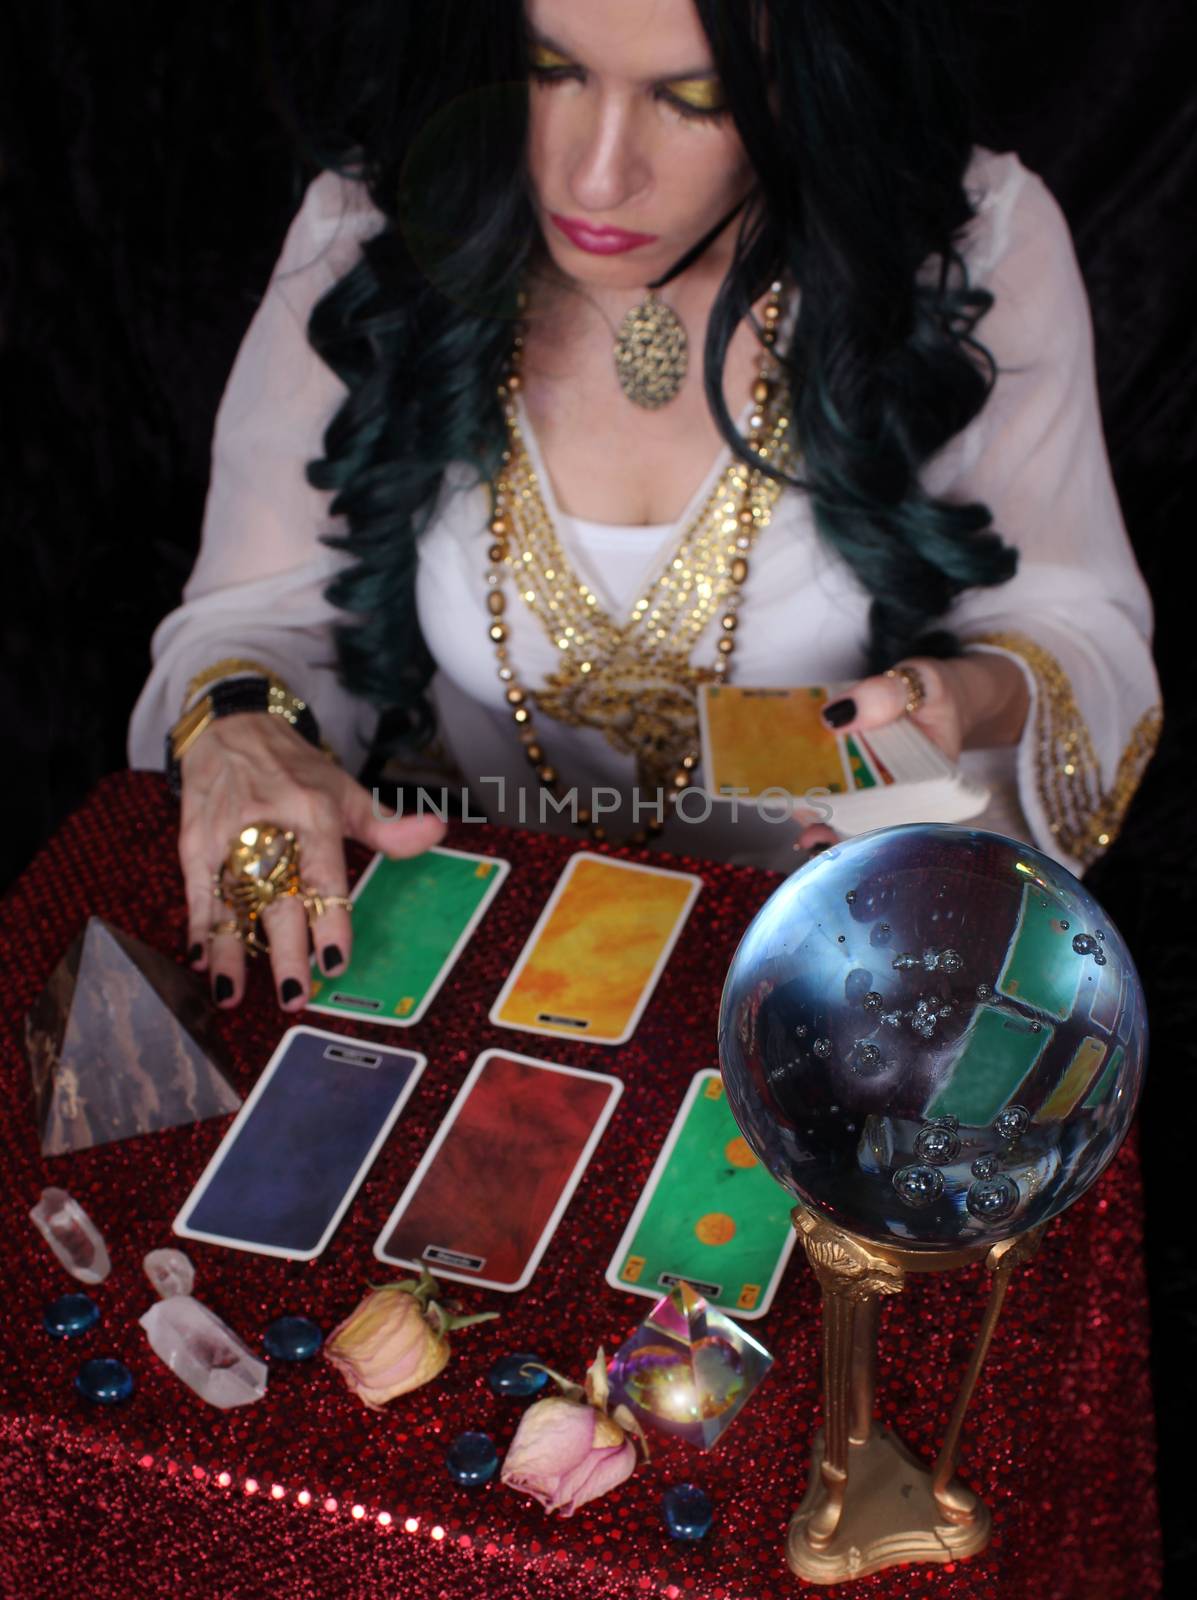 Psychic with green hair  Crystal Ball. and tarot cards